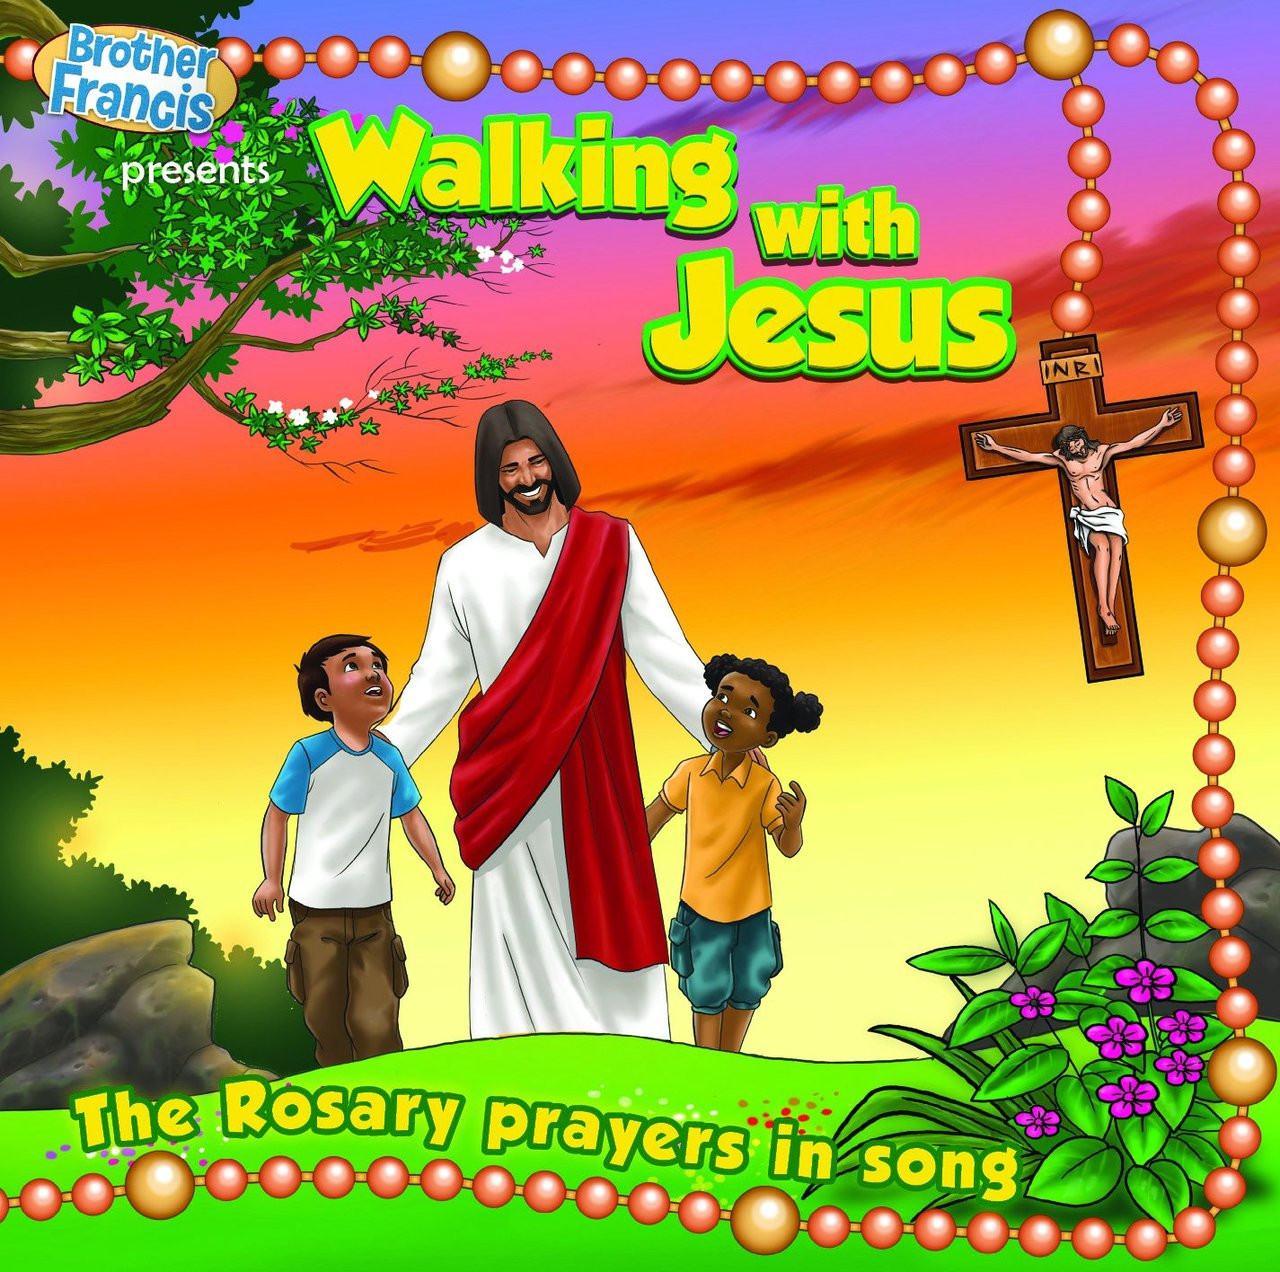 Walking with Jesus - The Rosary prayers in song (CD)